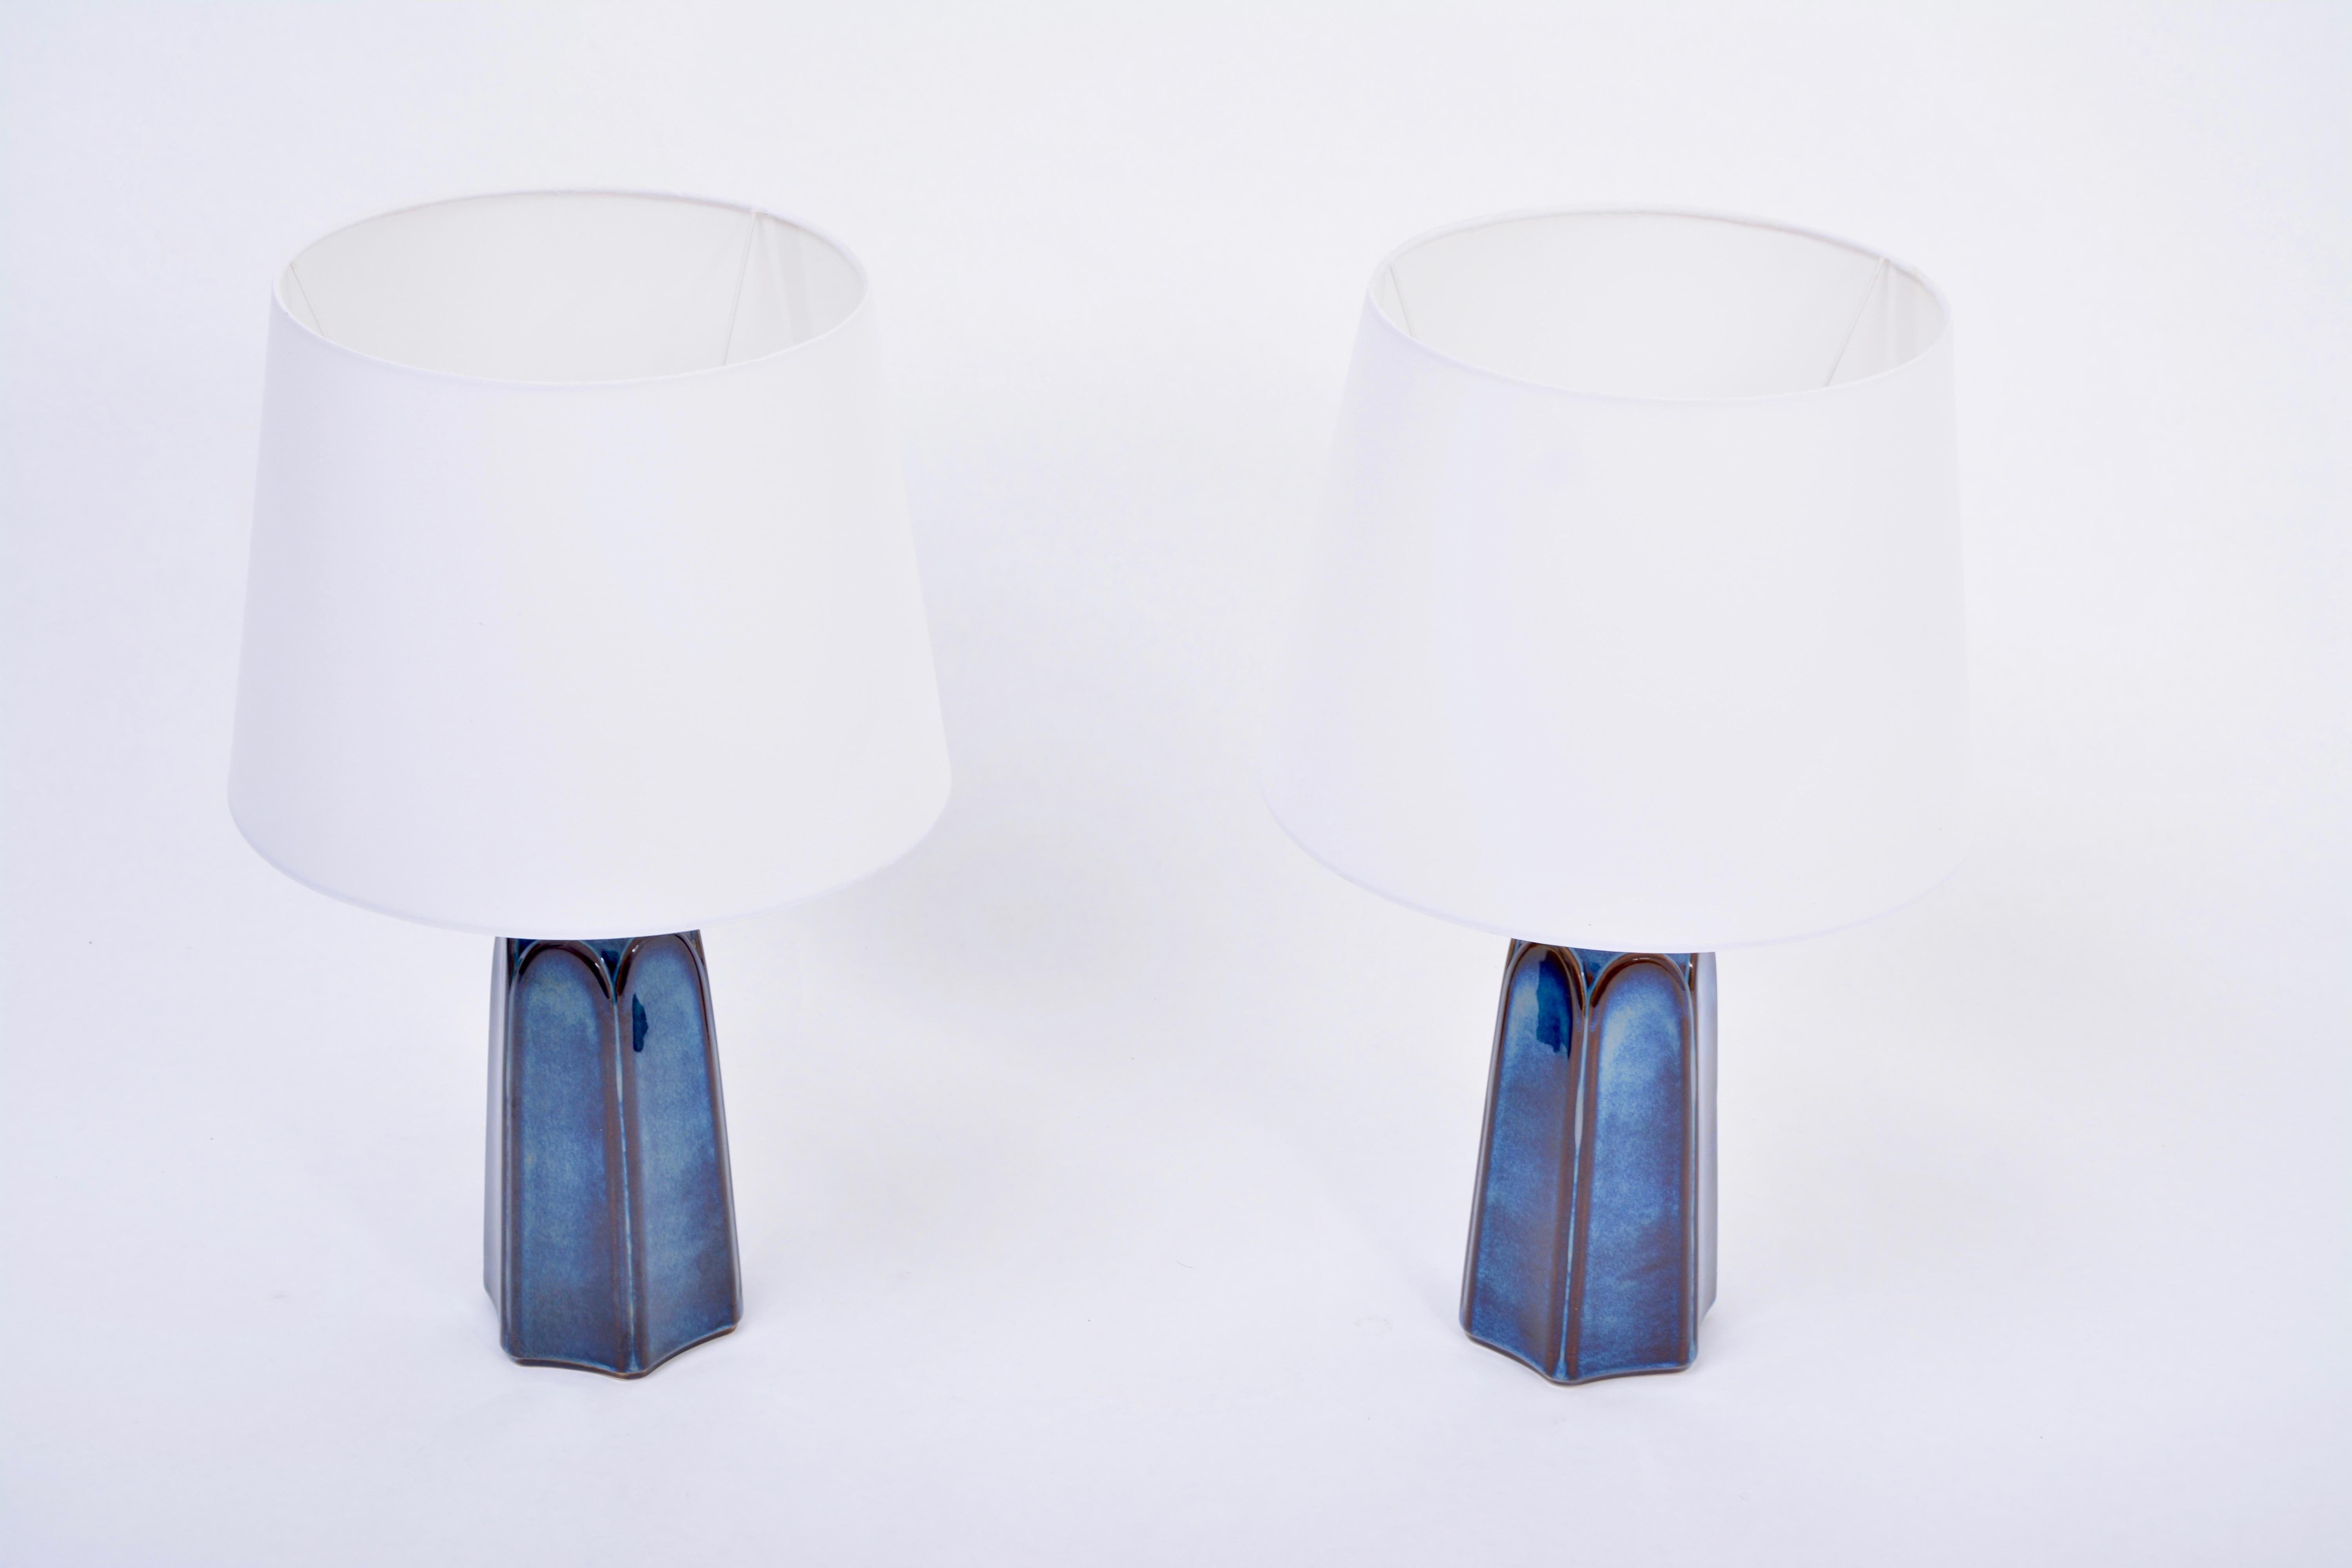 Pair of tall blue stoneware table lamps Model 1042 by Einar Johansen for Søholm

Pair of table lamps made of stoneware with blue ceramic glazing to the base of the lamps. Designed by Einar Johansen and produced by Danish company Soholm. The lamps